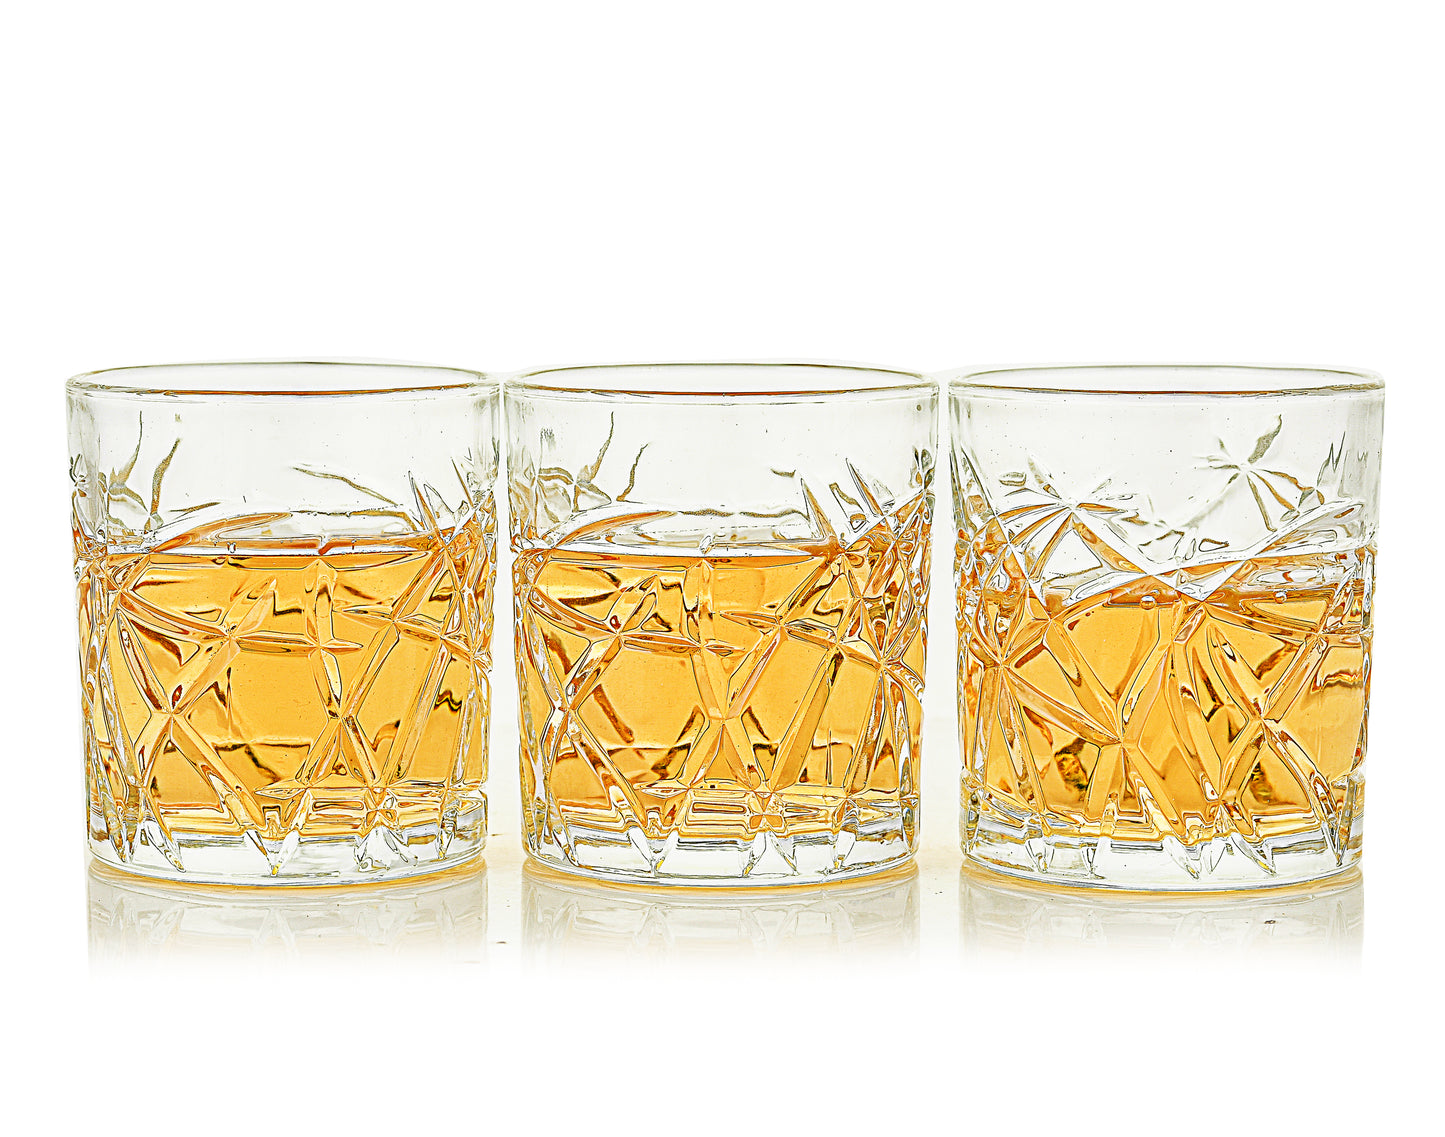 MACHAK Whiskey Glasses Set of 6, 250 ML  Bar Glass for Drinking Bourbon, Whisky, Scotch, Cocktails (Transparent)